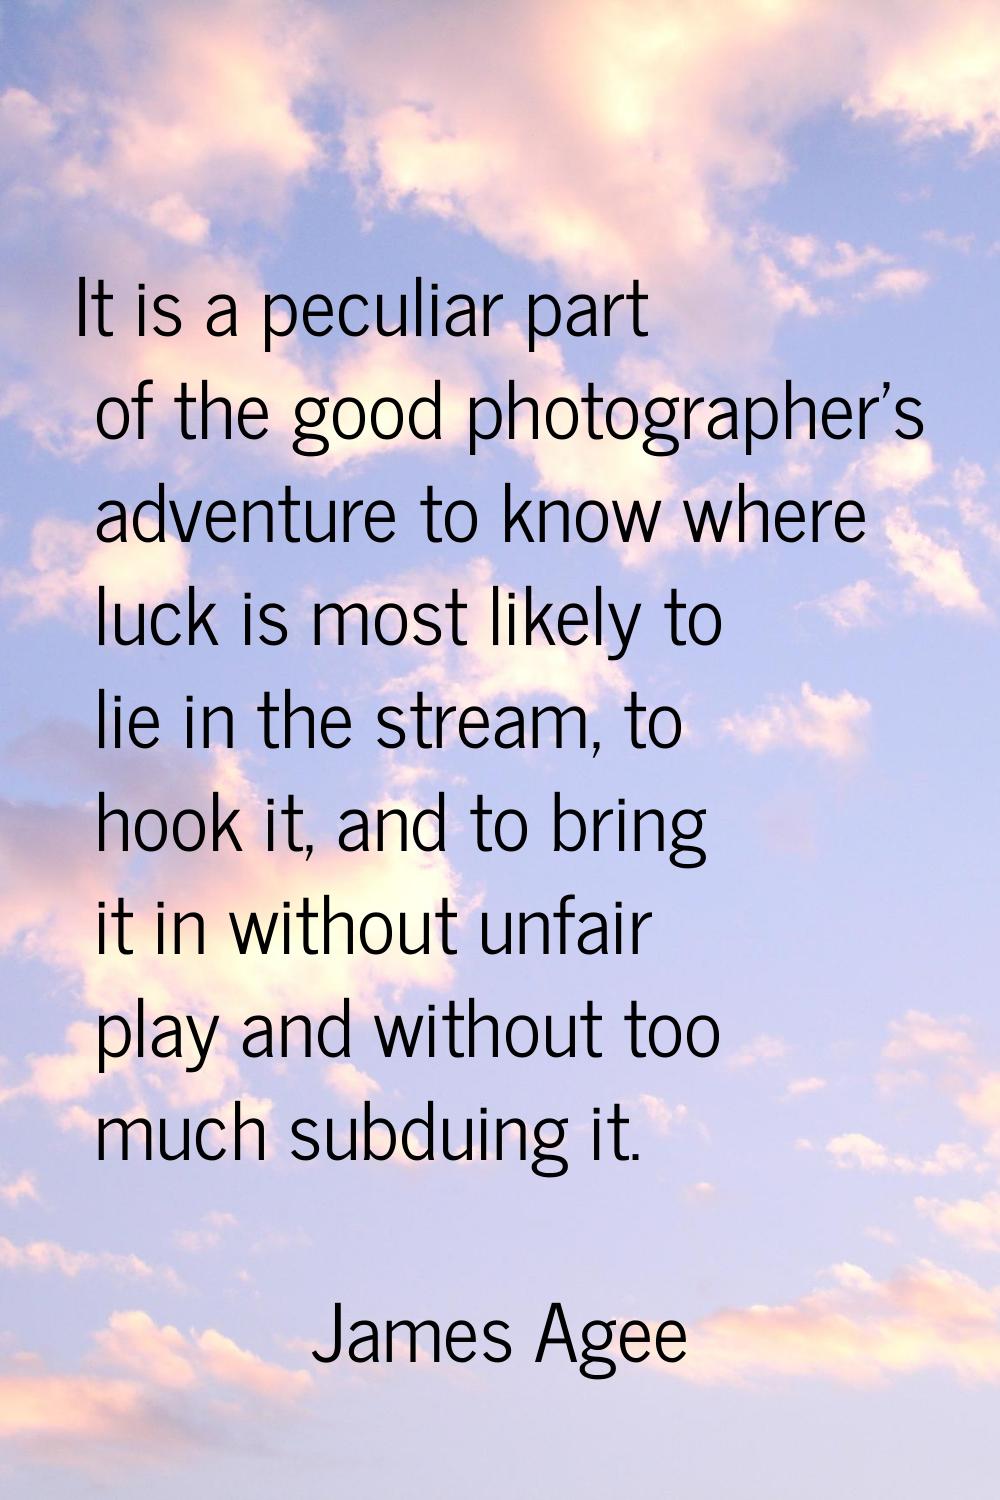 It is a peculiar part of the good photographer's adventure to know where luck is most likely to lie